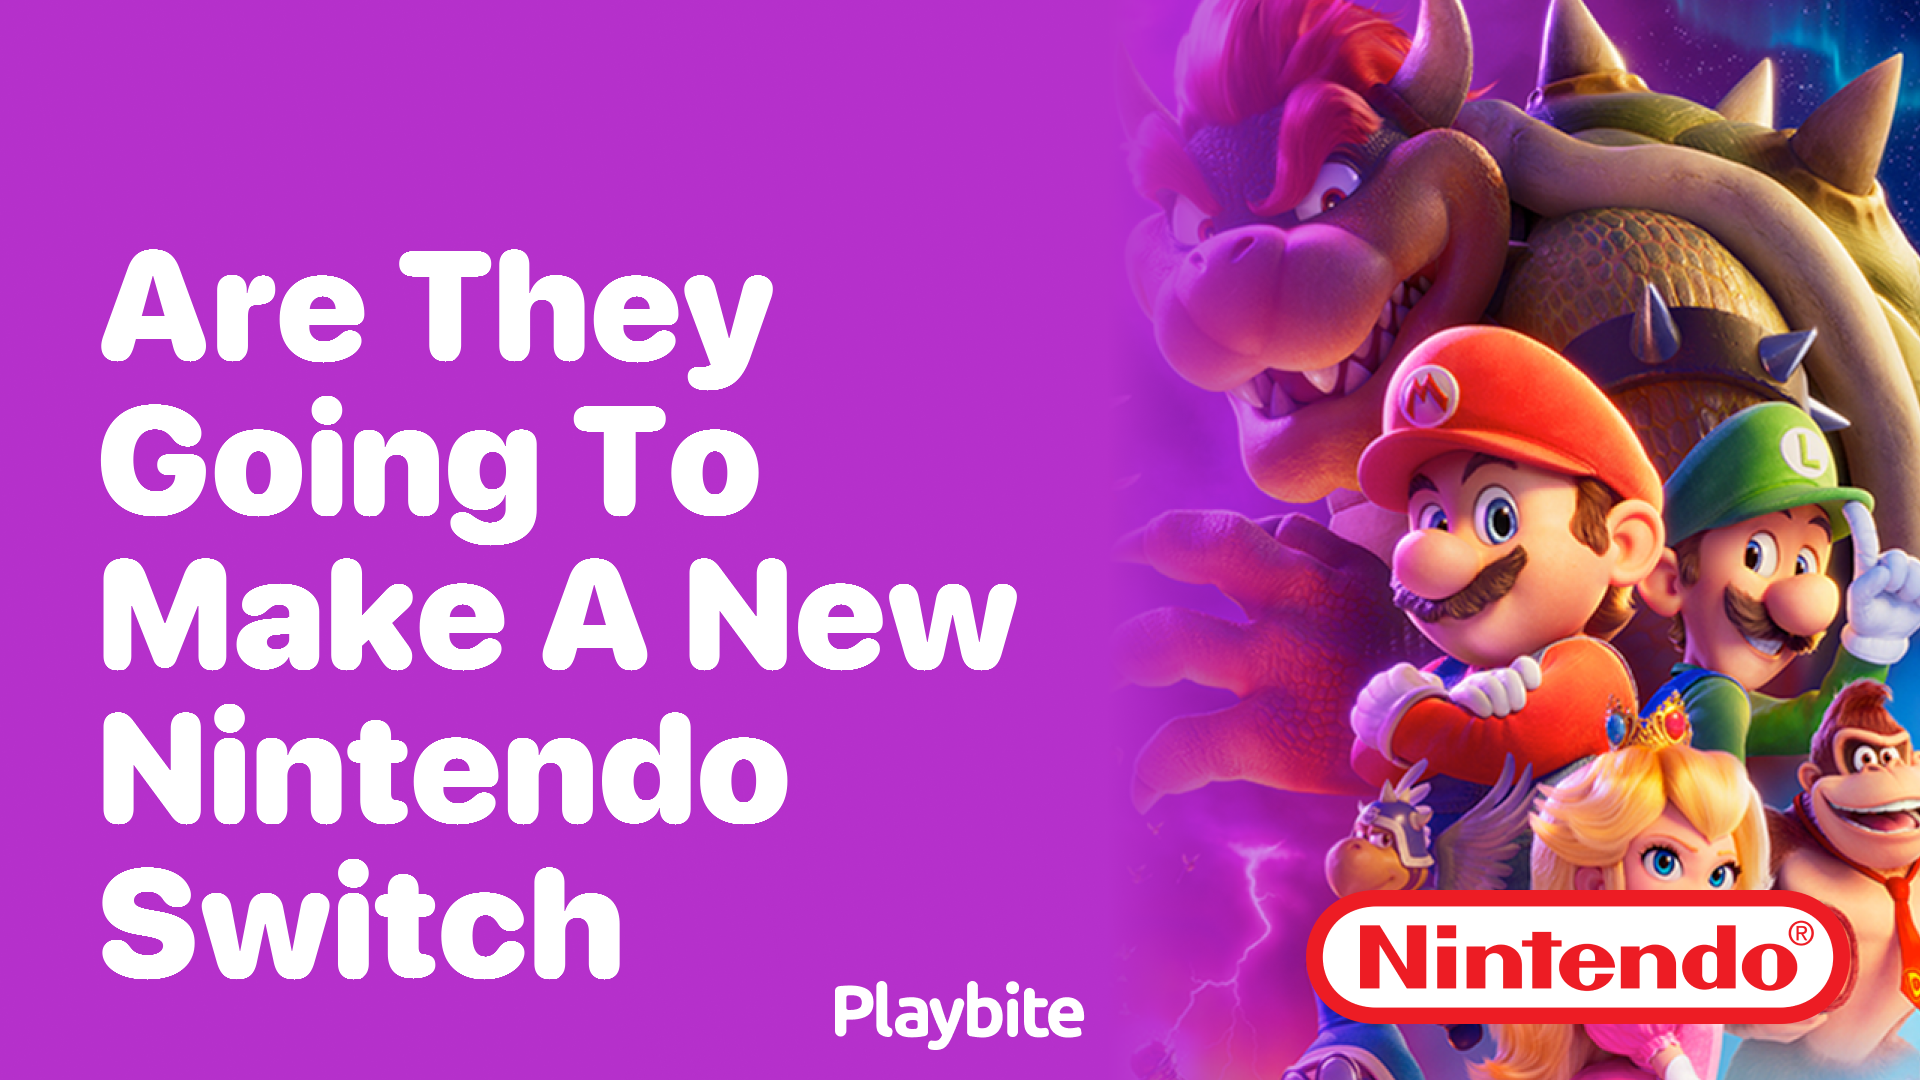 Are They Going to Make a New Nintendo Switch?